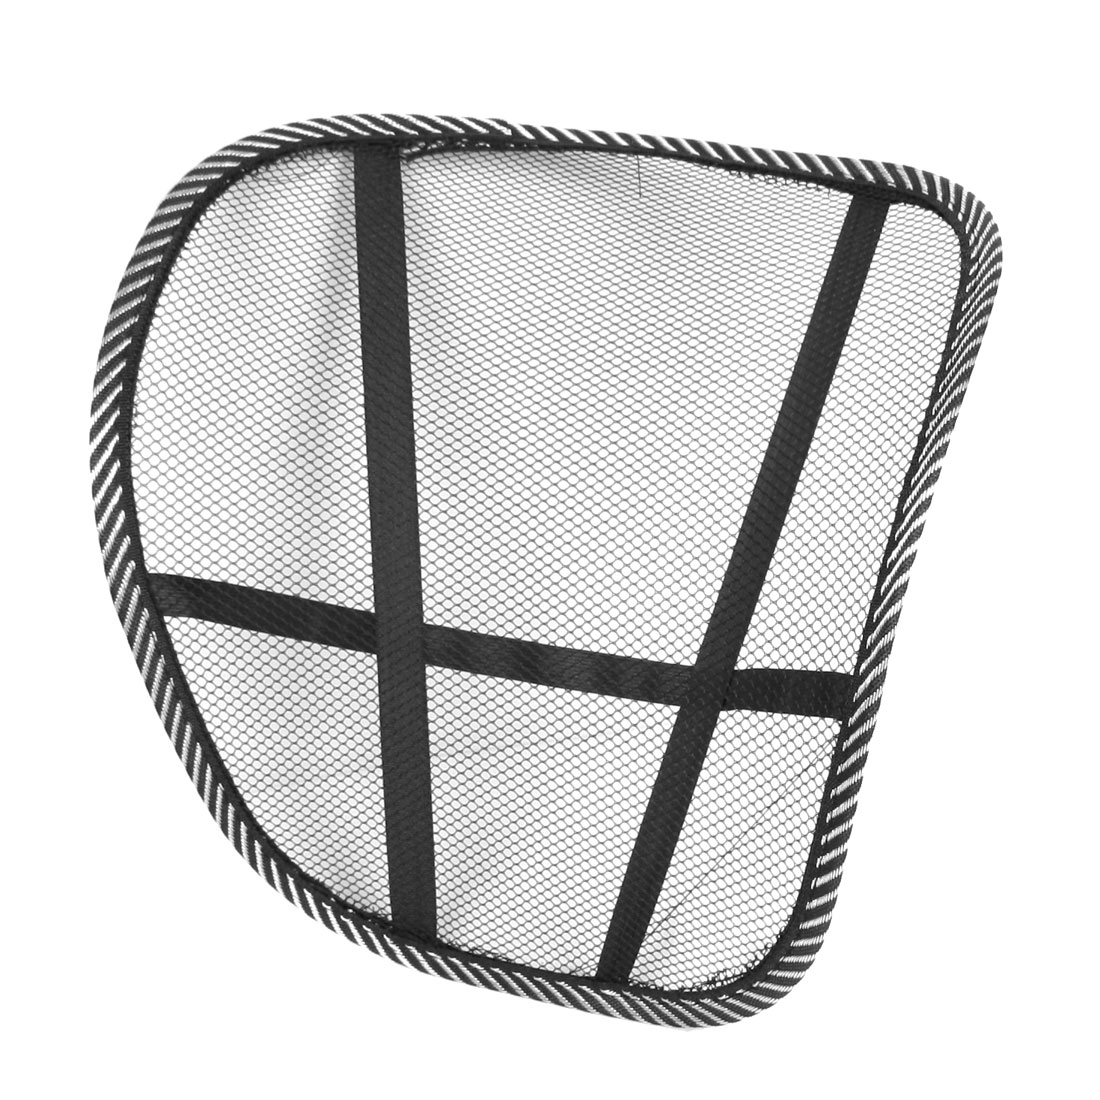 Unique Bargains Home Chair Truck Car Seat Cooling Air Flow Mesh Back Rest Support